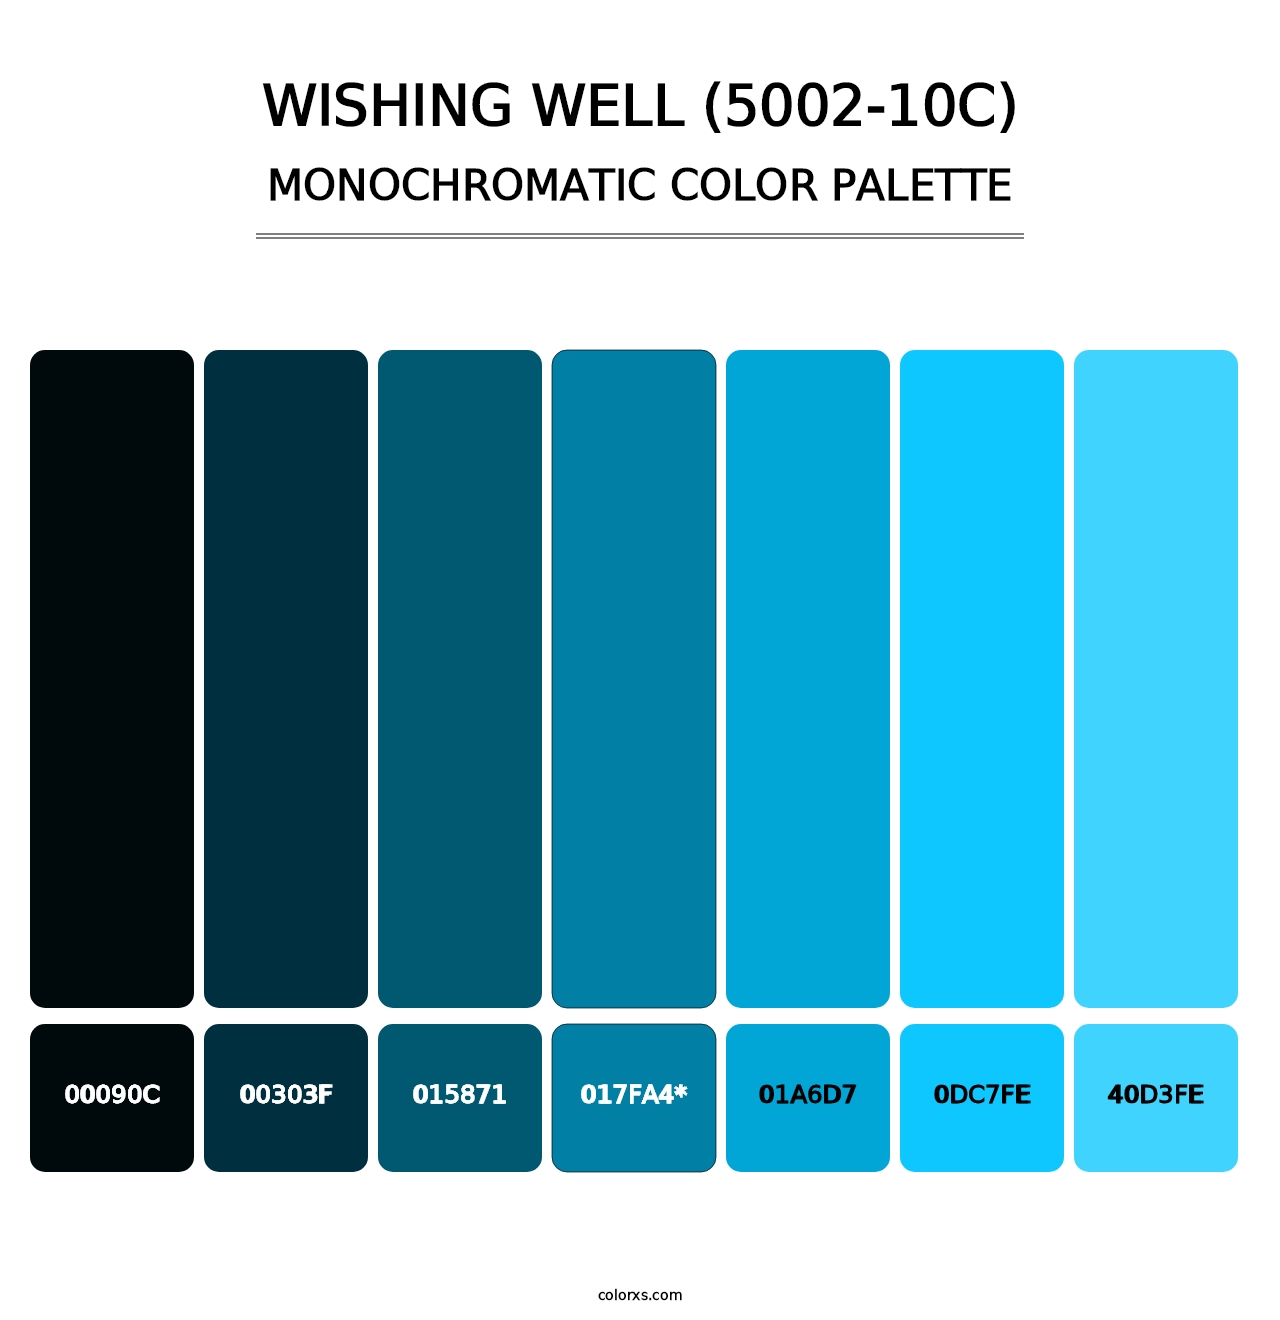 Wishing Well (5002-10C) - Monochromatic Color Palette